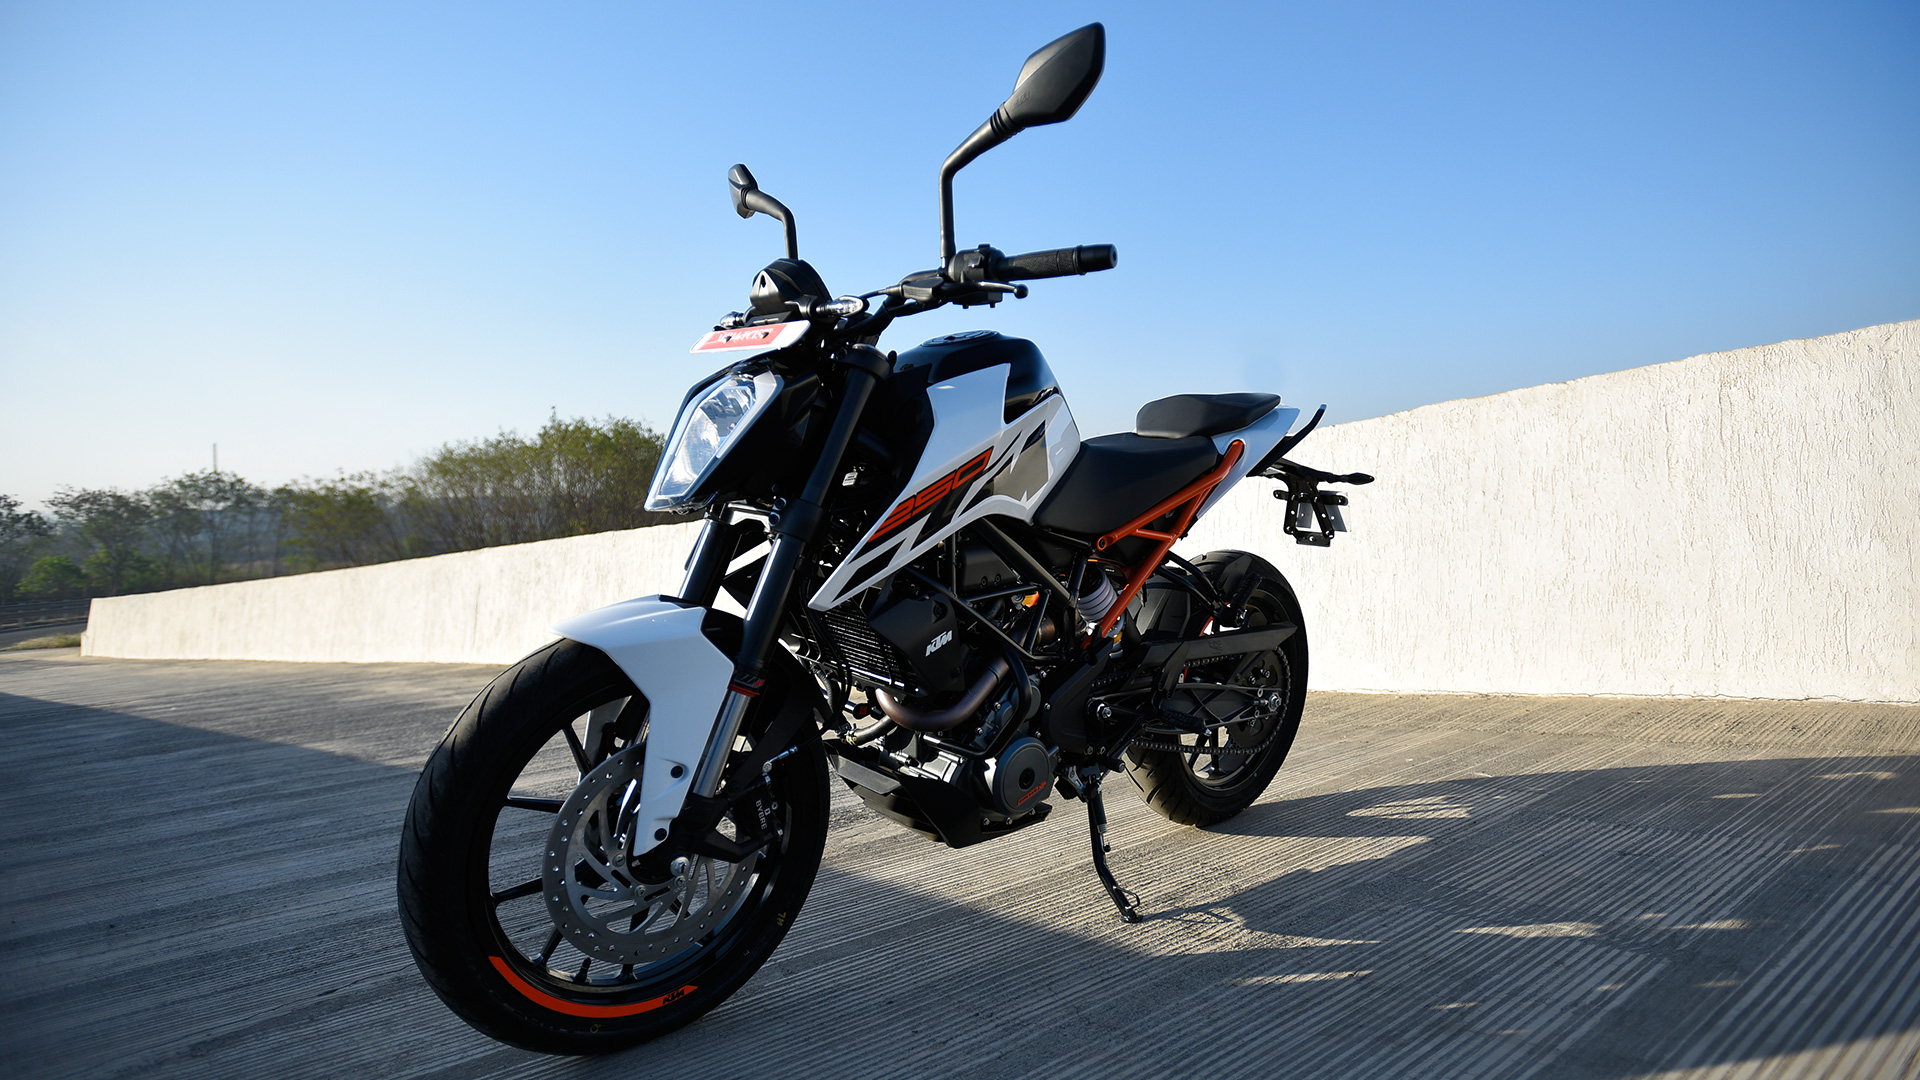 Ktm 250 Duke 2017 Price Mileage Reviews Specification Gallery